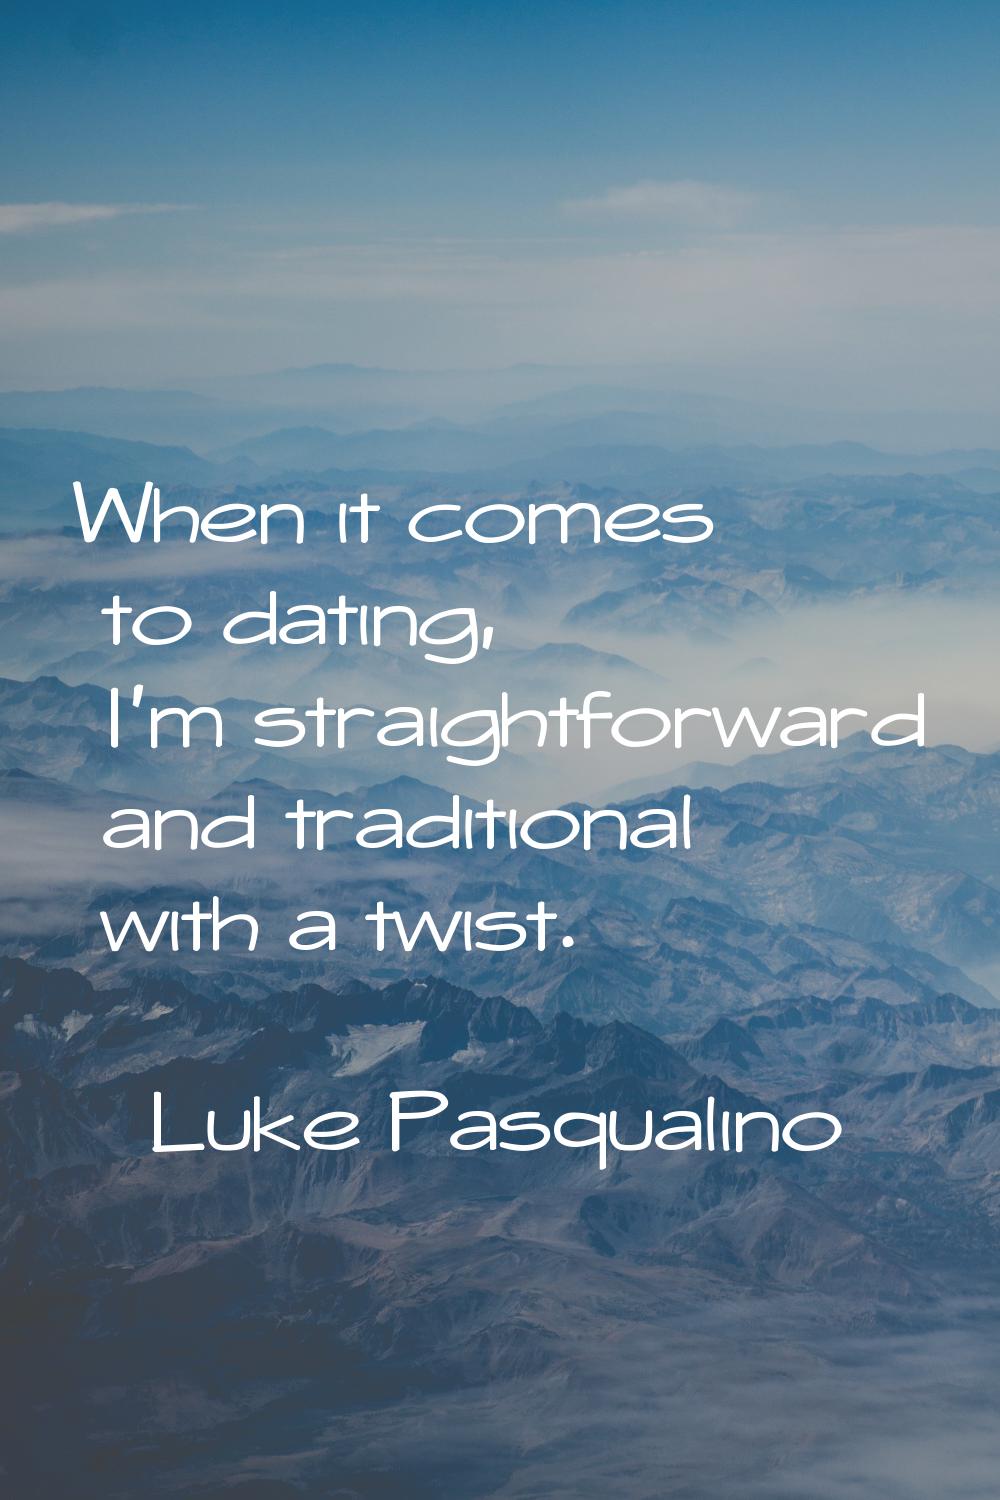 When it comes to dating, I'm straightforward and traditional with a twist.